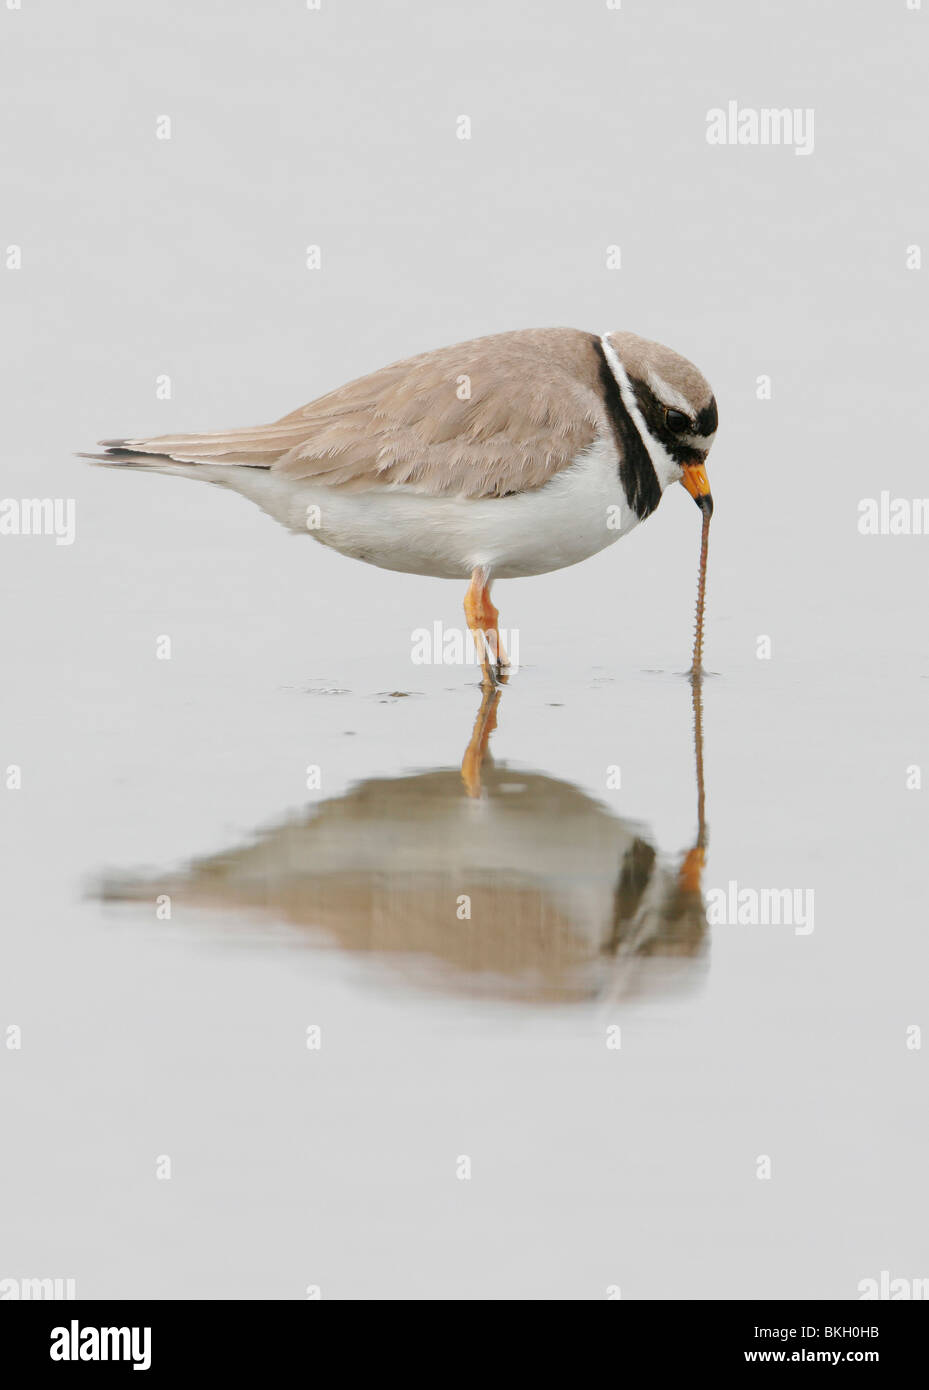 Bontbekplevier foeragerend op Zagers; Common Ringed Plover fouraging on Ragworm Stock Photo